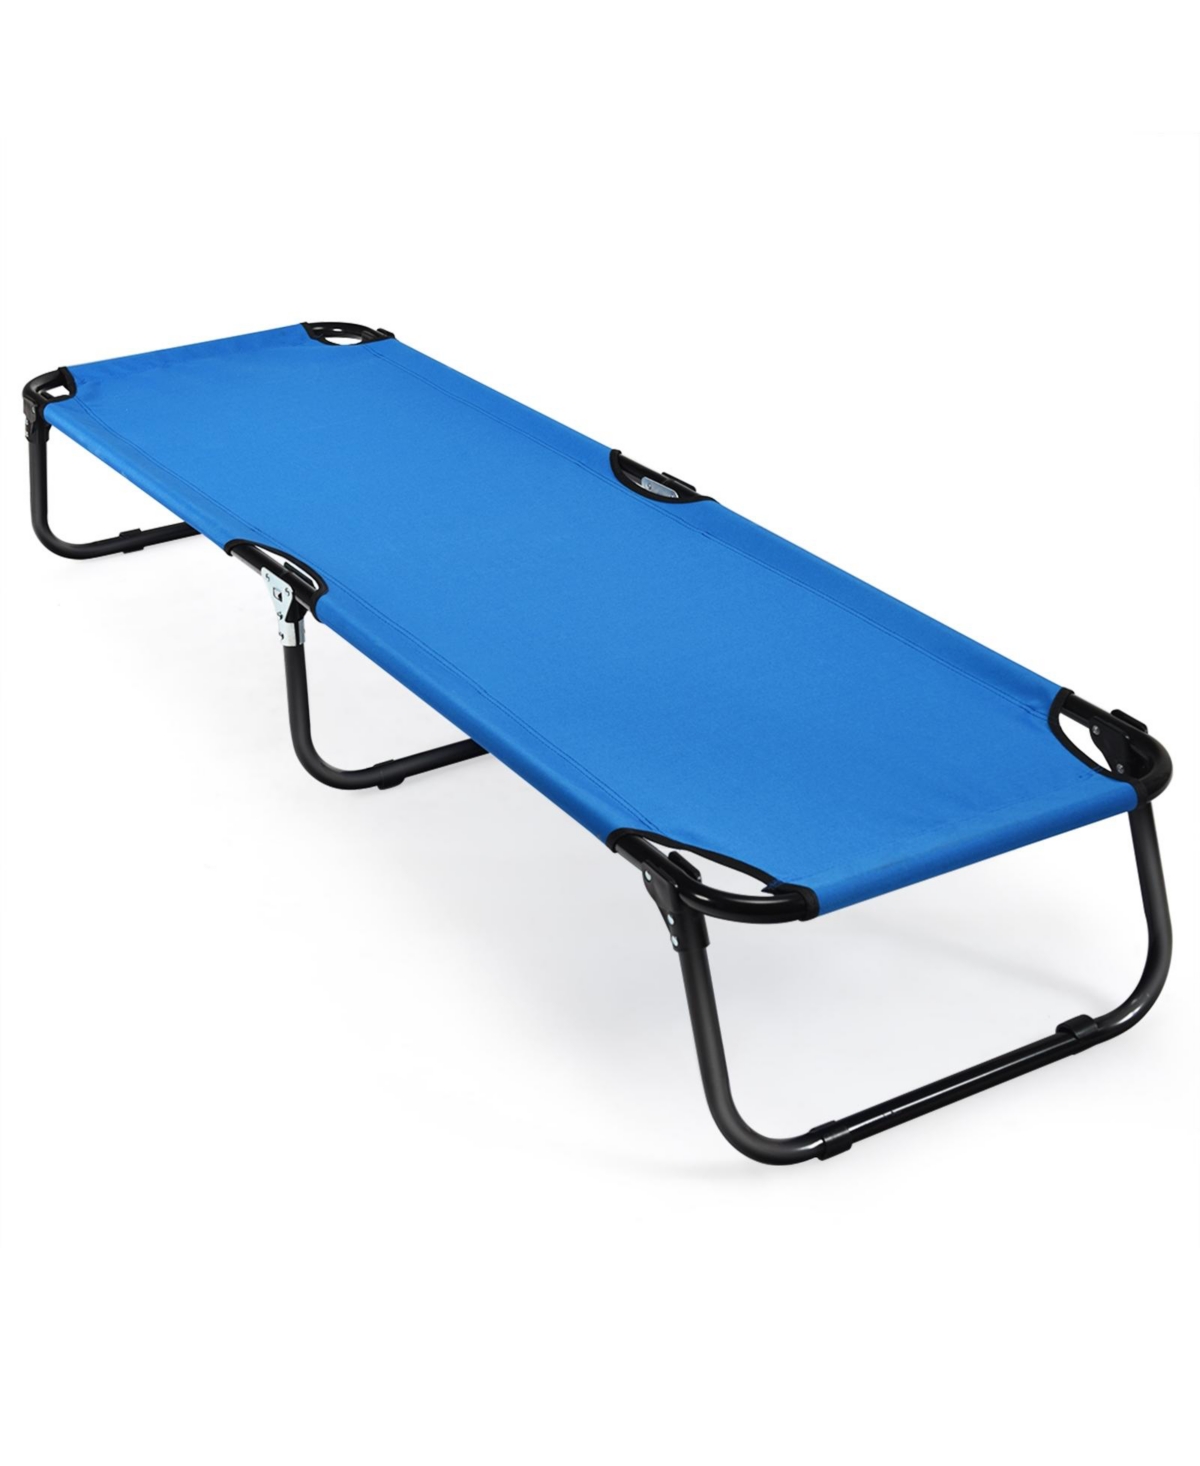 Outdoor Folding Camping Bed for Sleeping Hiking Travel - Blue